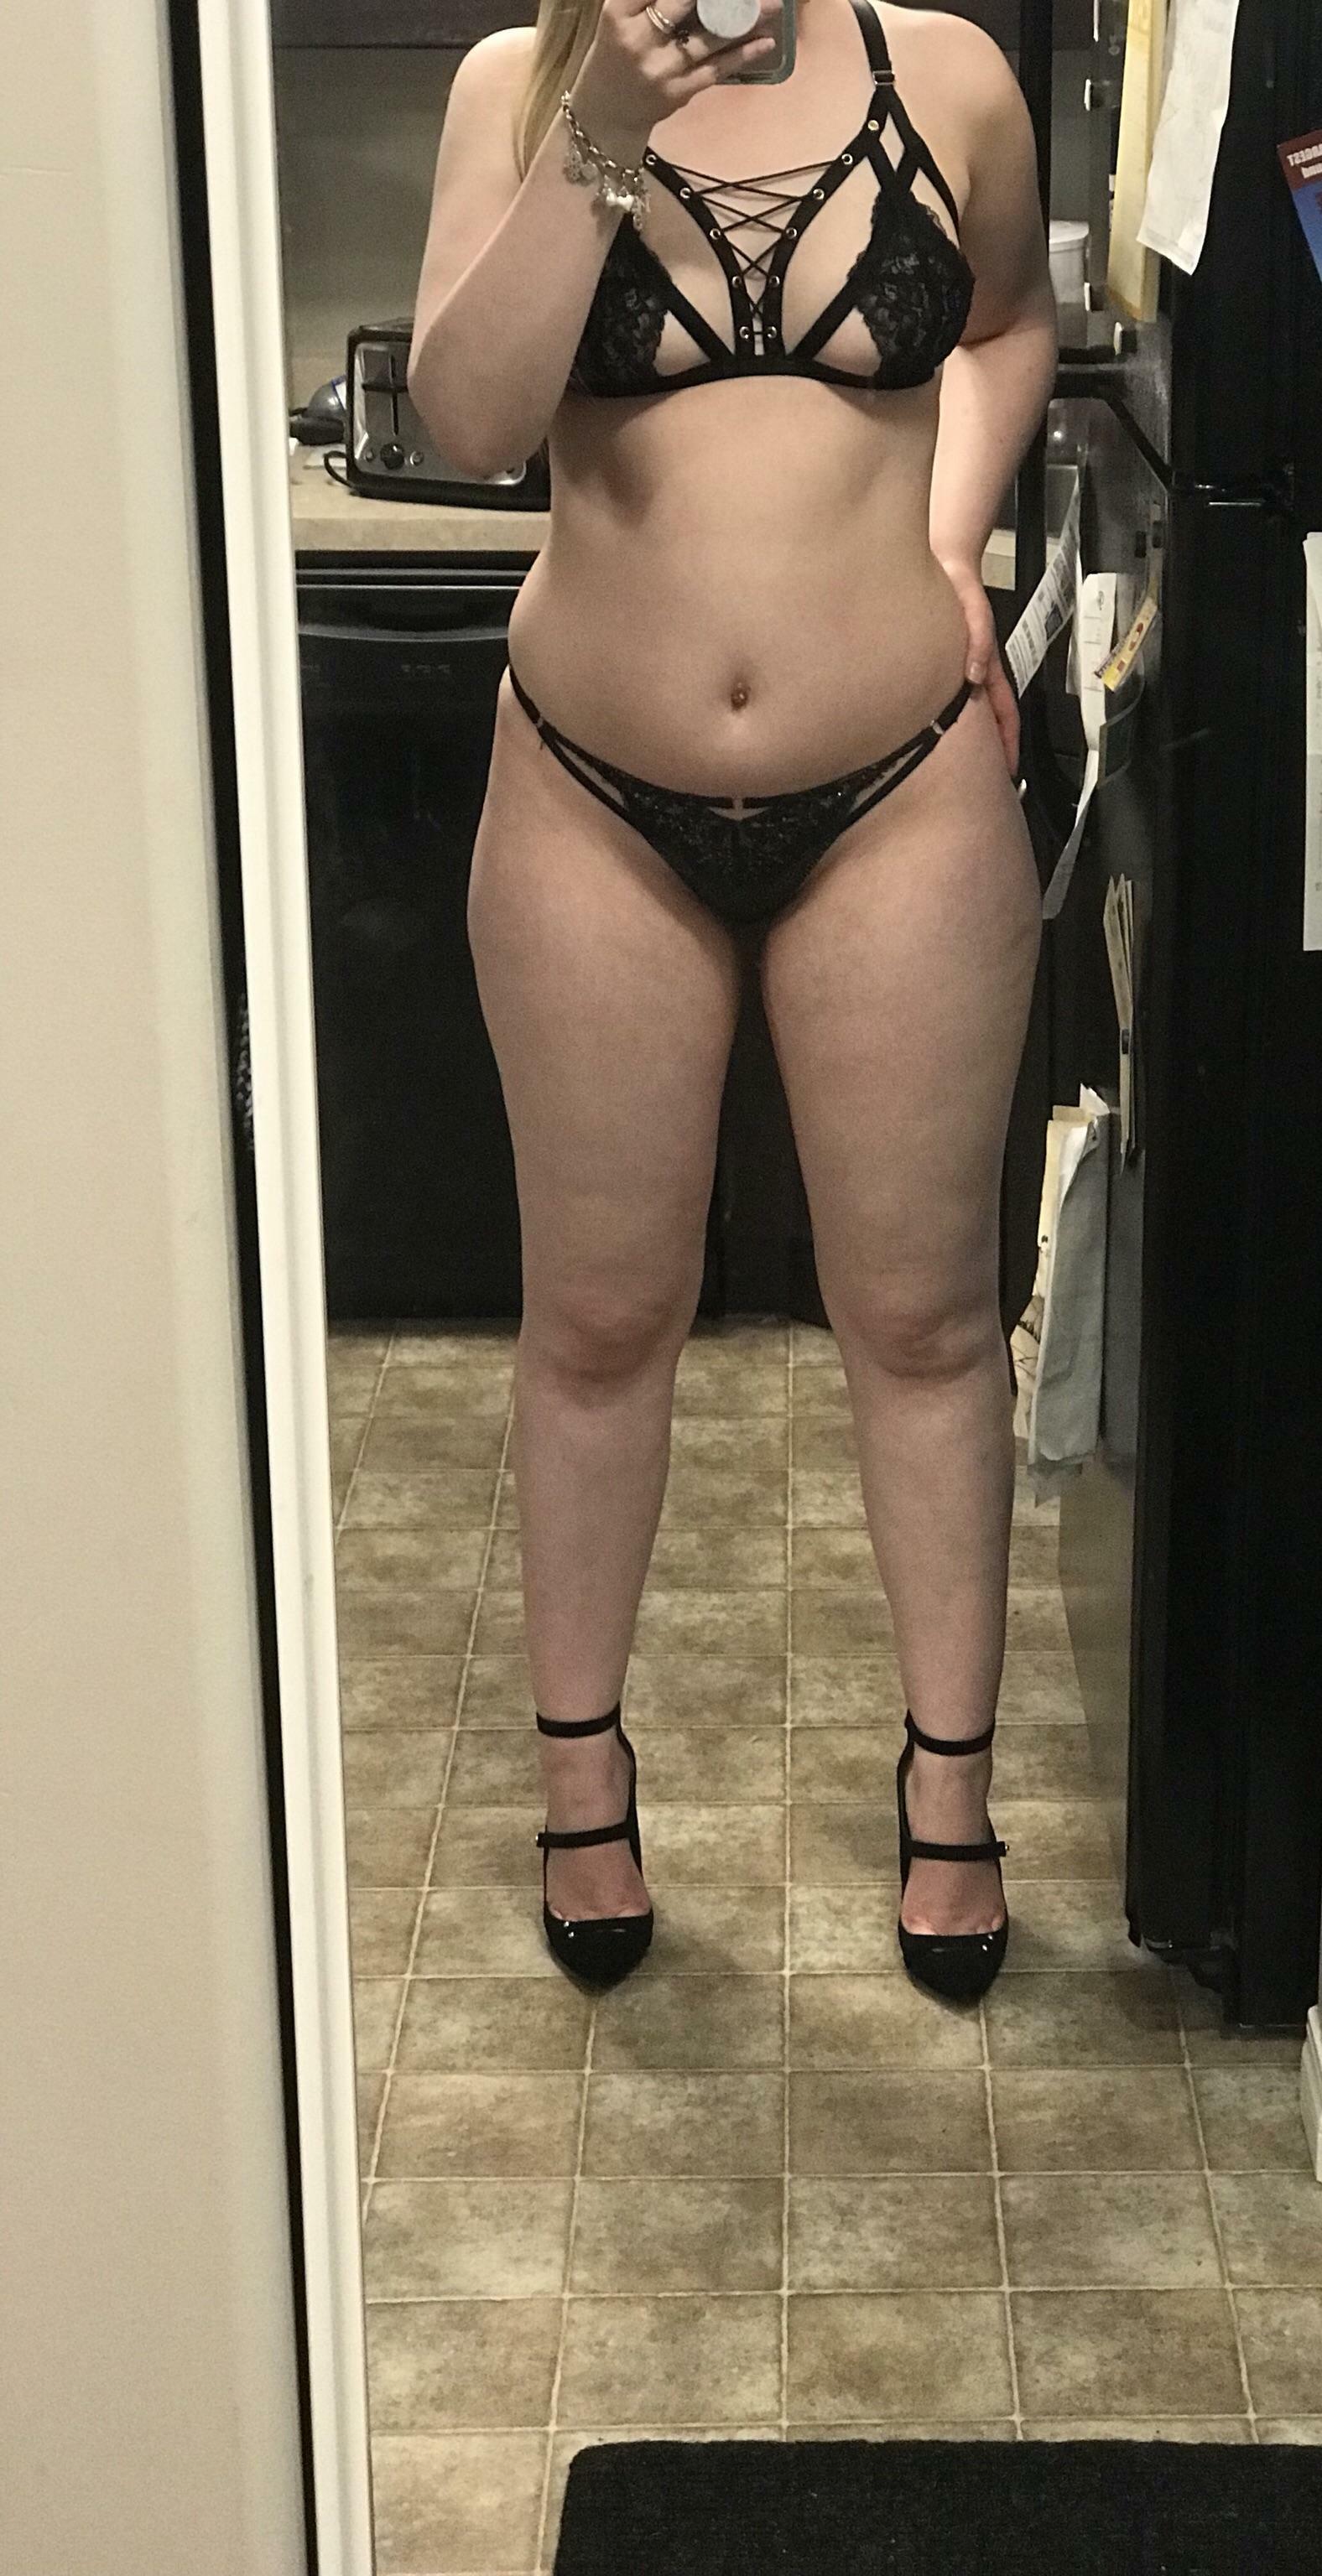 Hotwife looking for a new bull. 22F. Located in Alberta, Canada